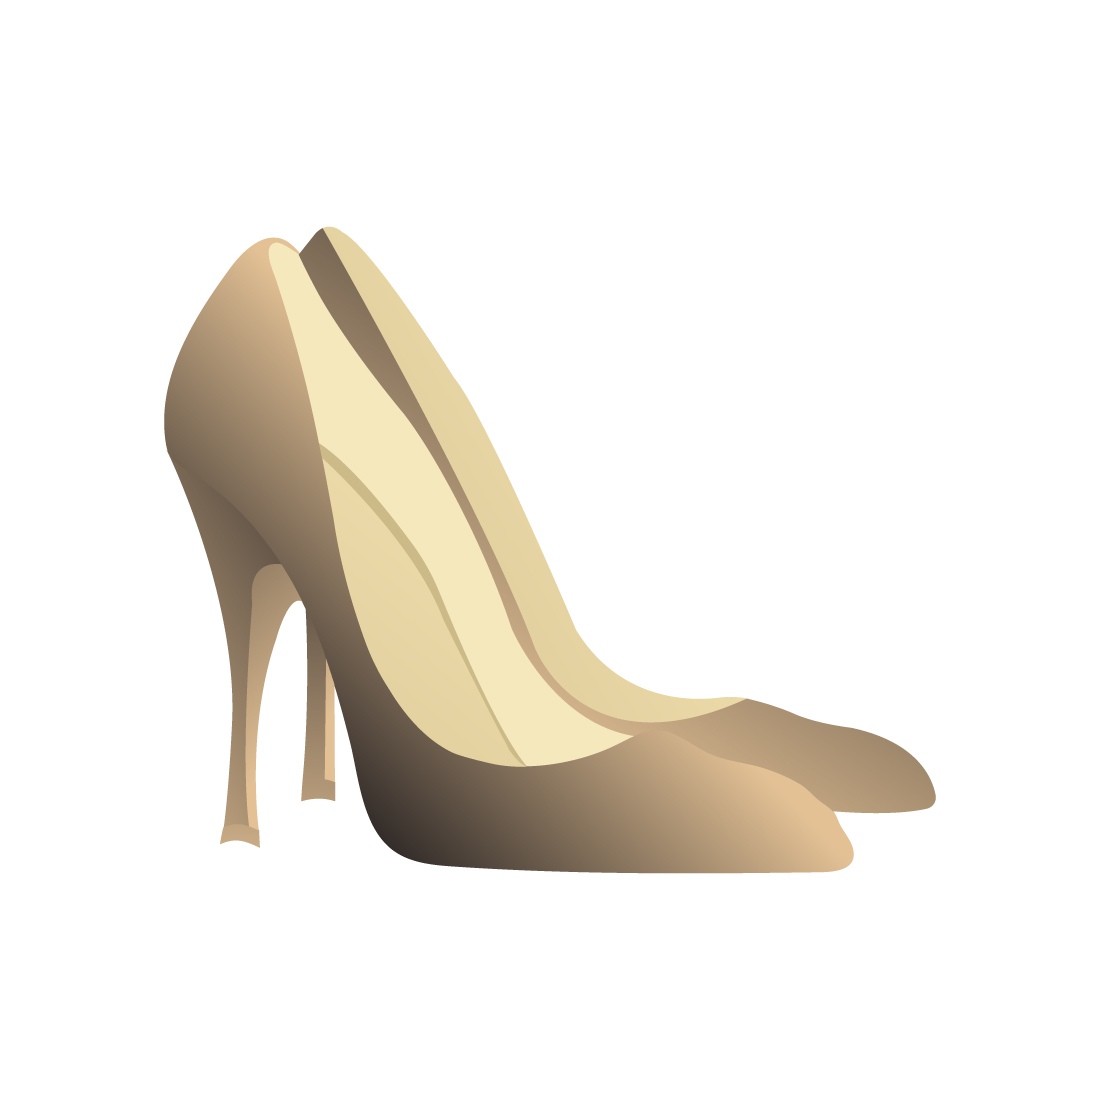 High heel shoe logo design vector images Women High Heel shoes template company identity preview image.